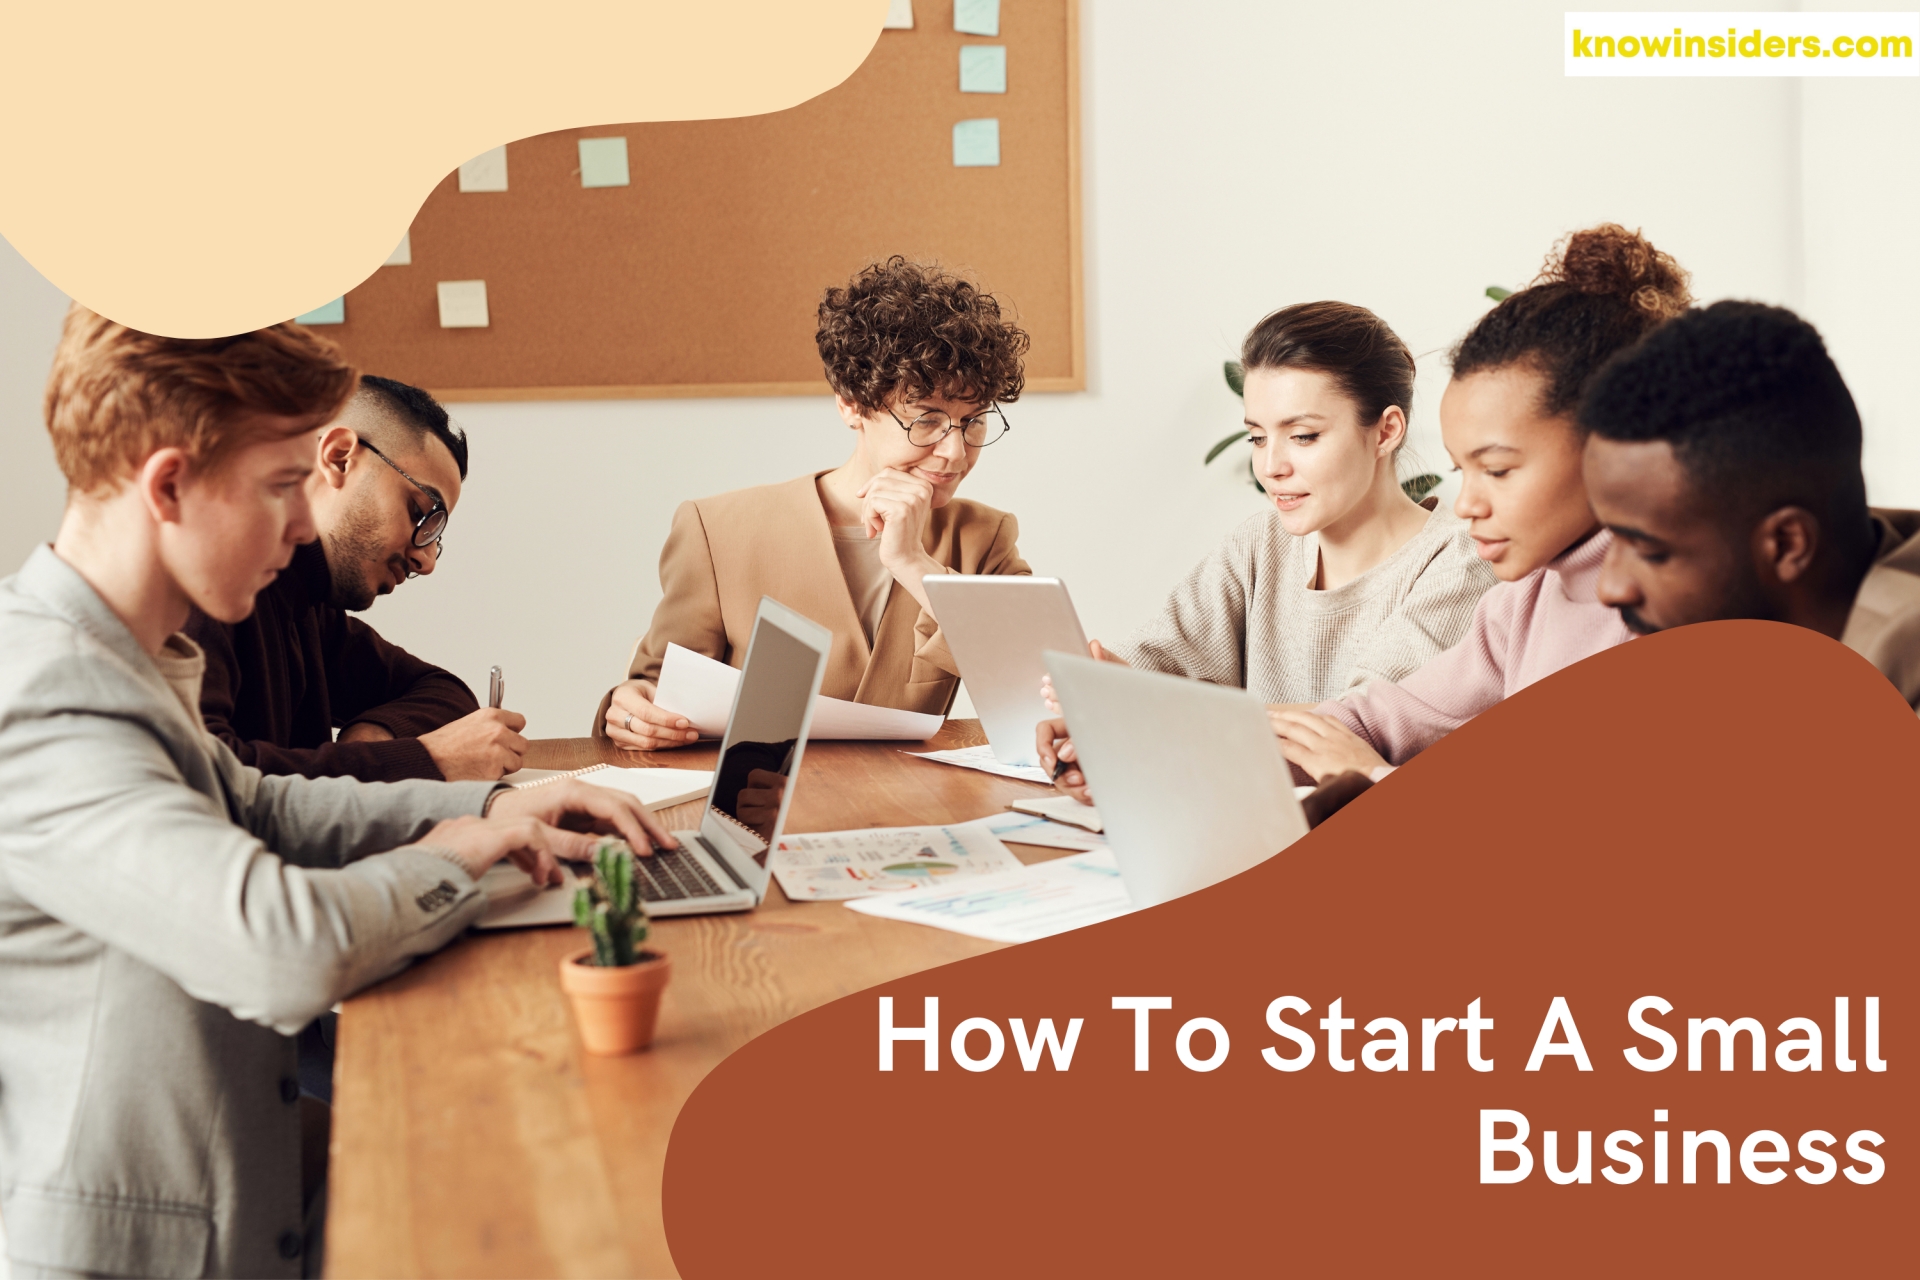 How To Start A Small Business From Best Ideas to Plan